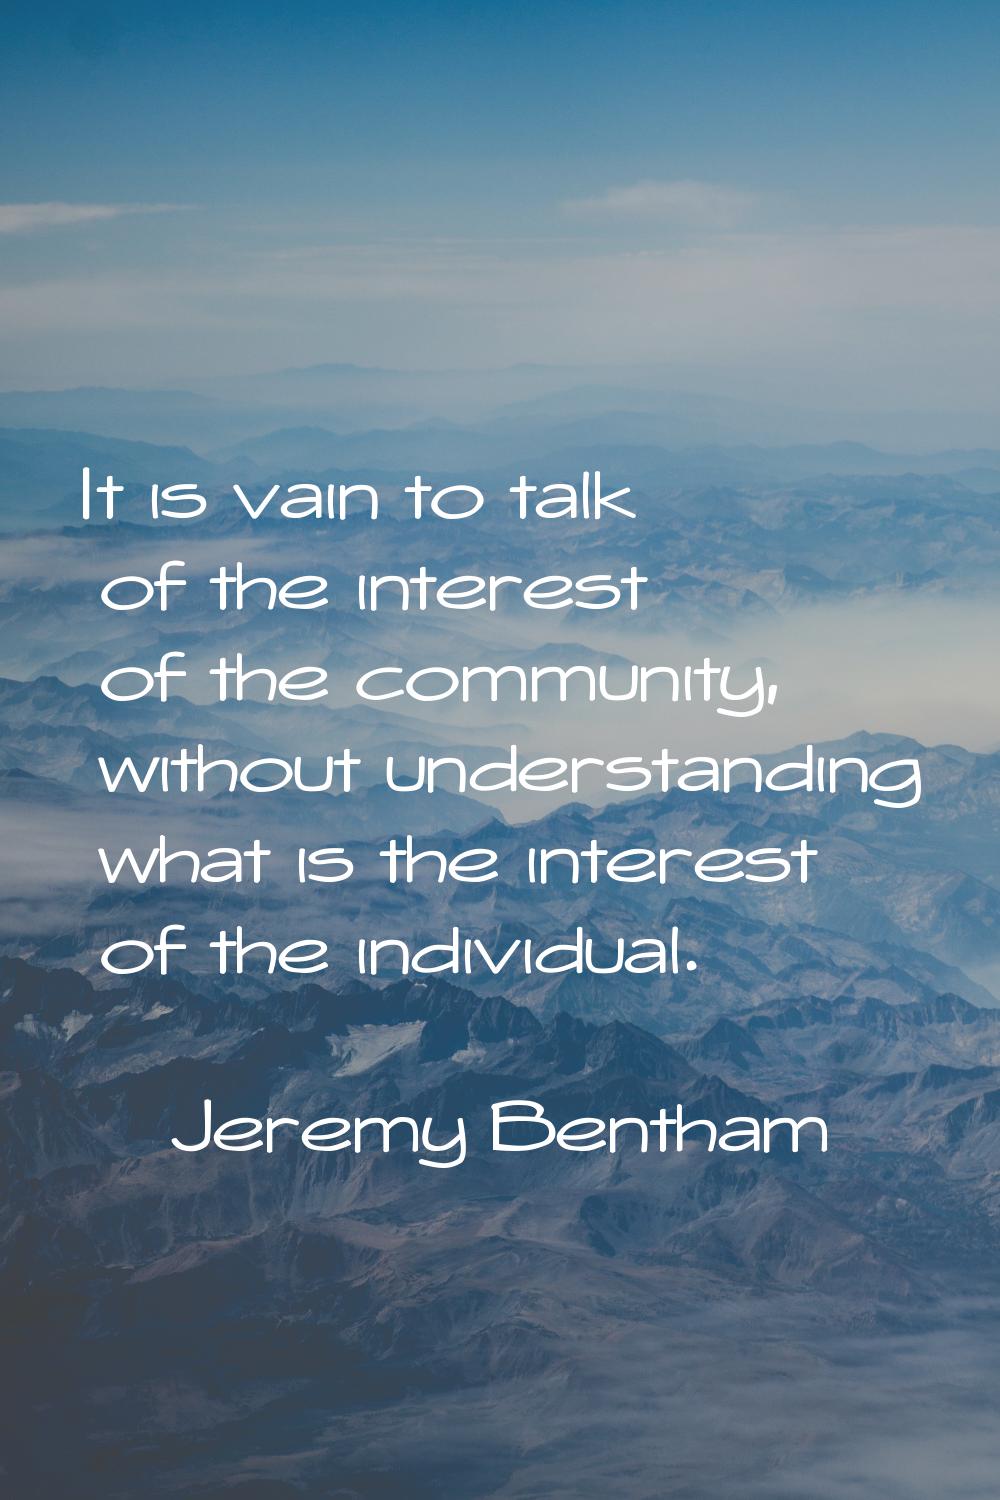 It is vain to talk of the interest of the community, without understanding what is the interest of 